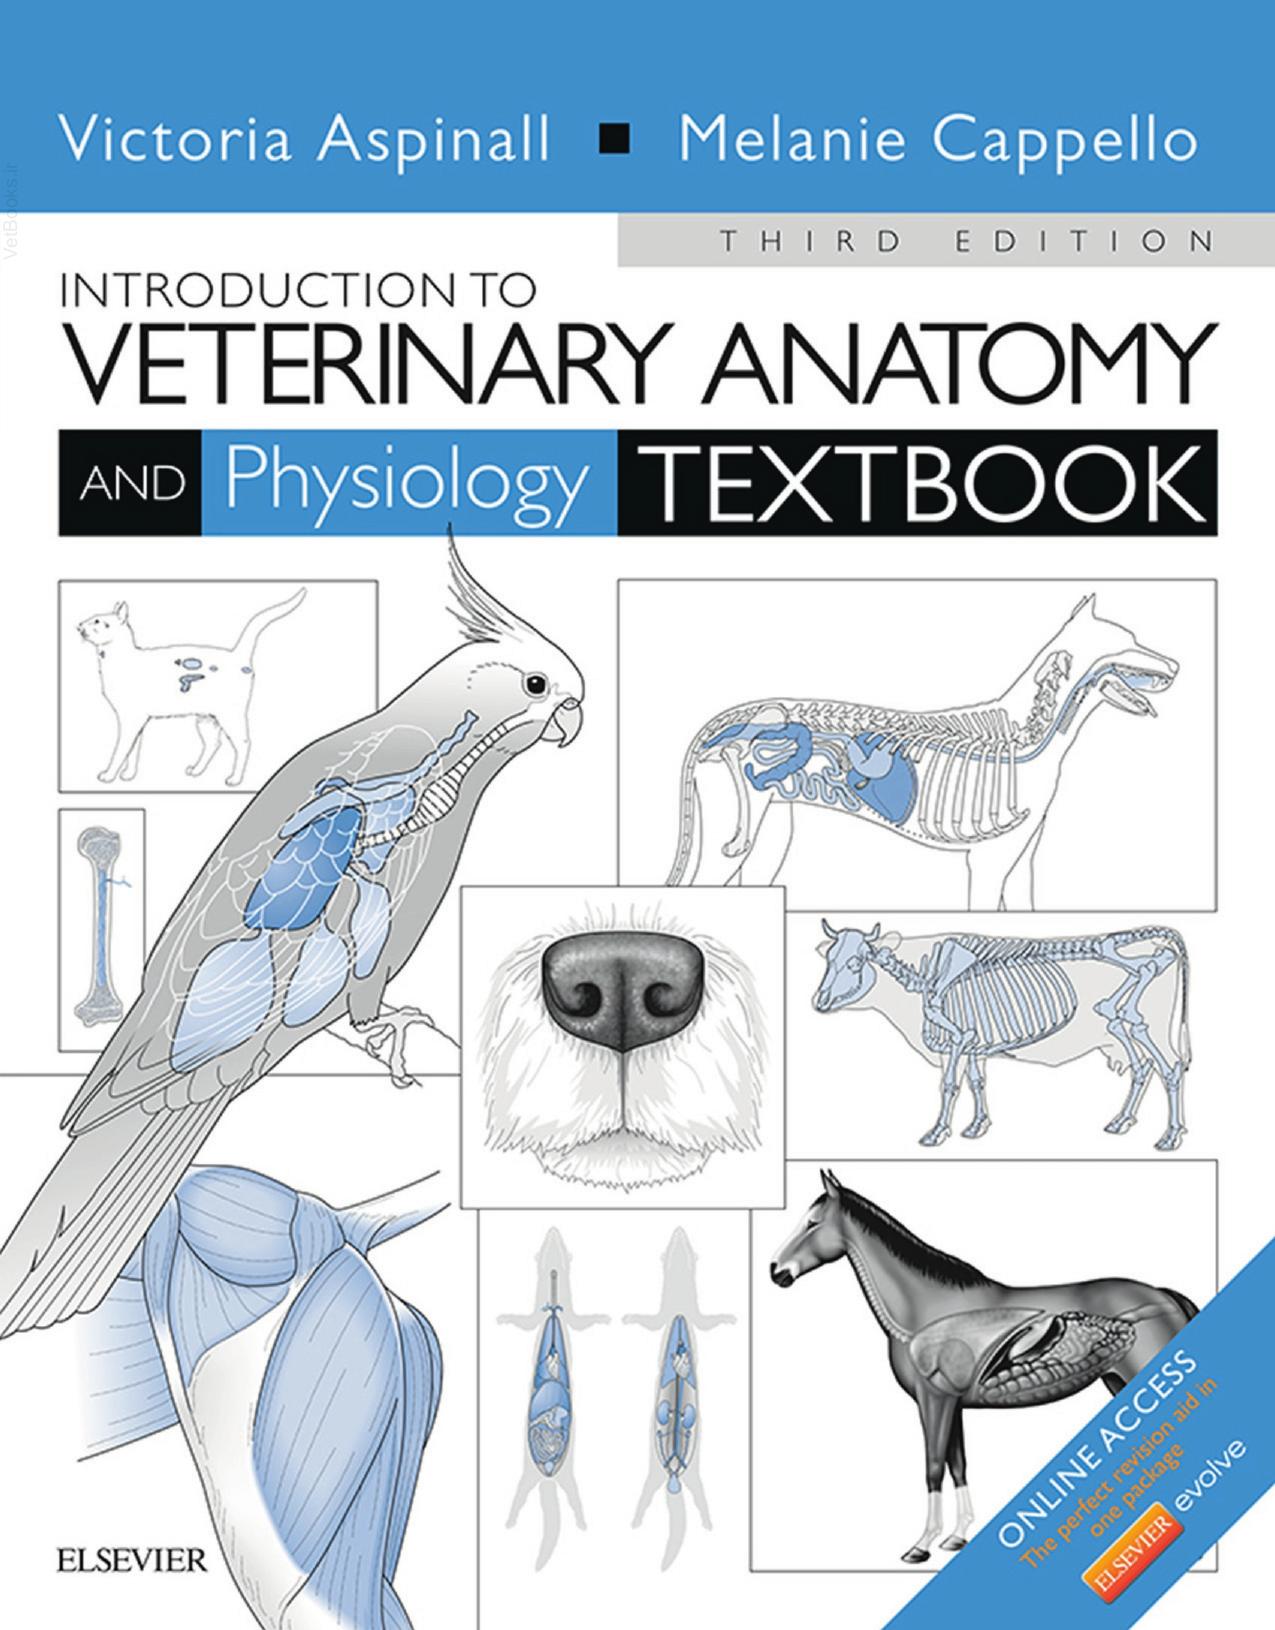 Introduction to Veterinary Anatomy and Physiology Textbook, 3rd Edition